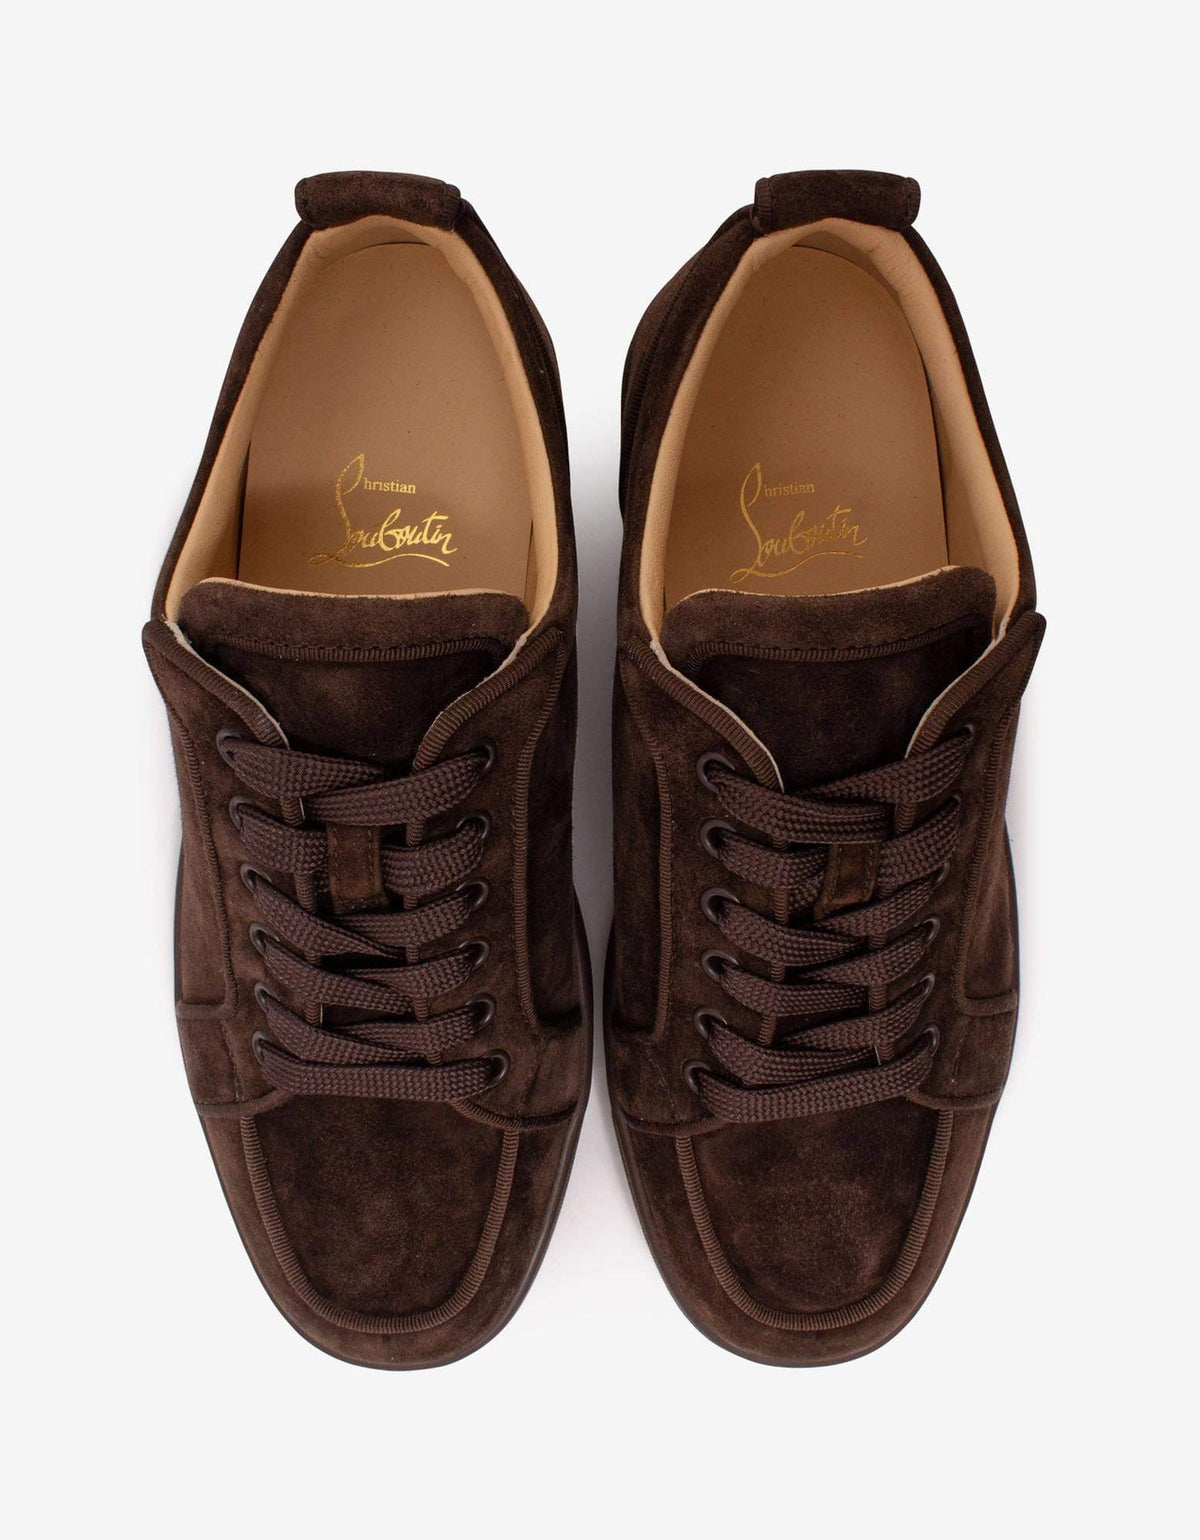 Christian Louboutin Rantulow Orlato Brown Suede Leather Trainers